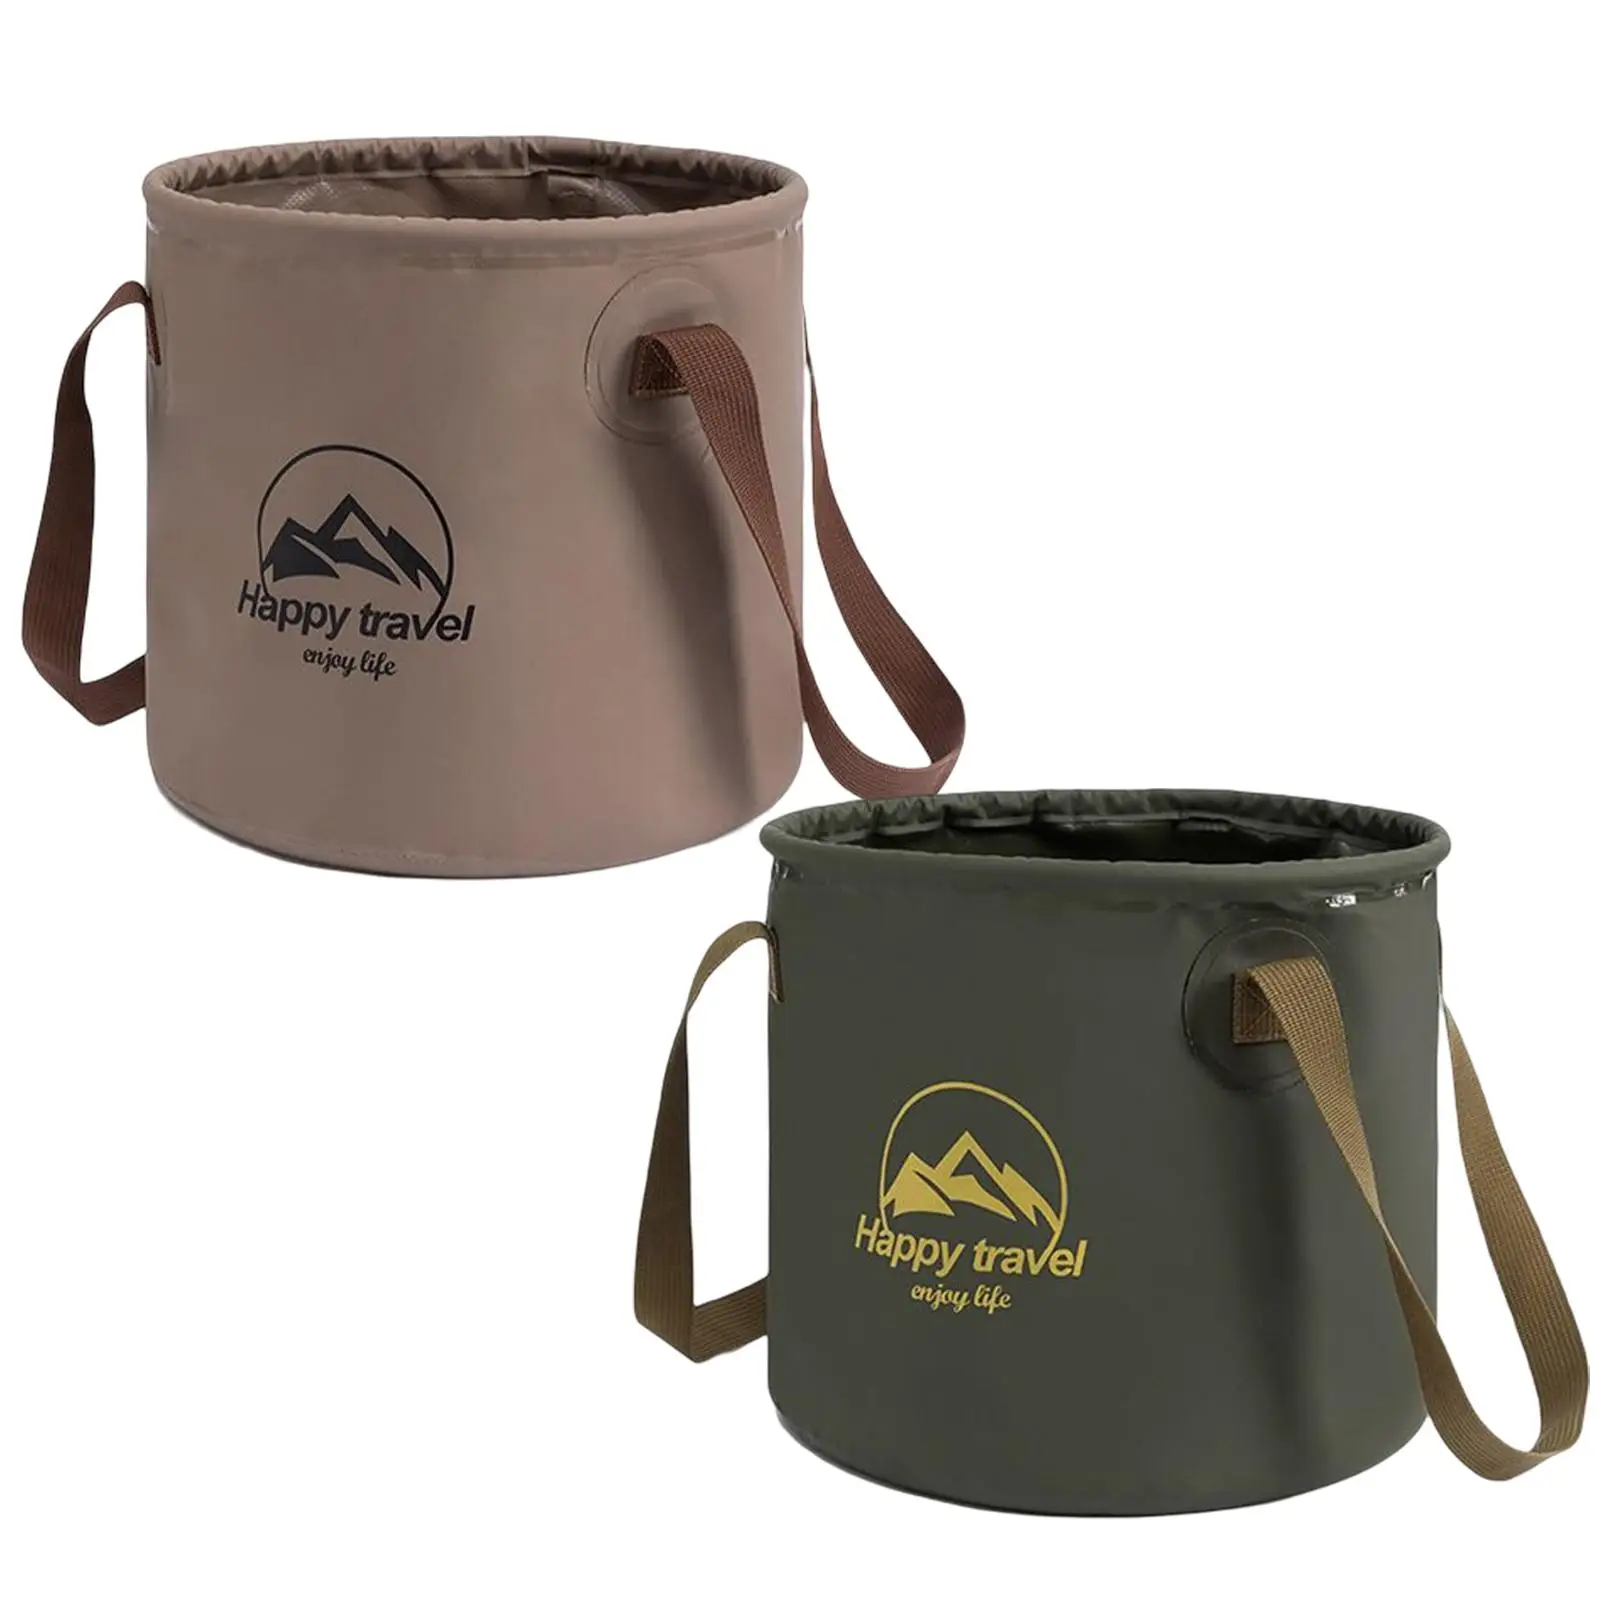 5 Gallon Collapsible Bucket Folding Compact Water Container for Camping